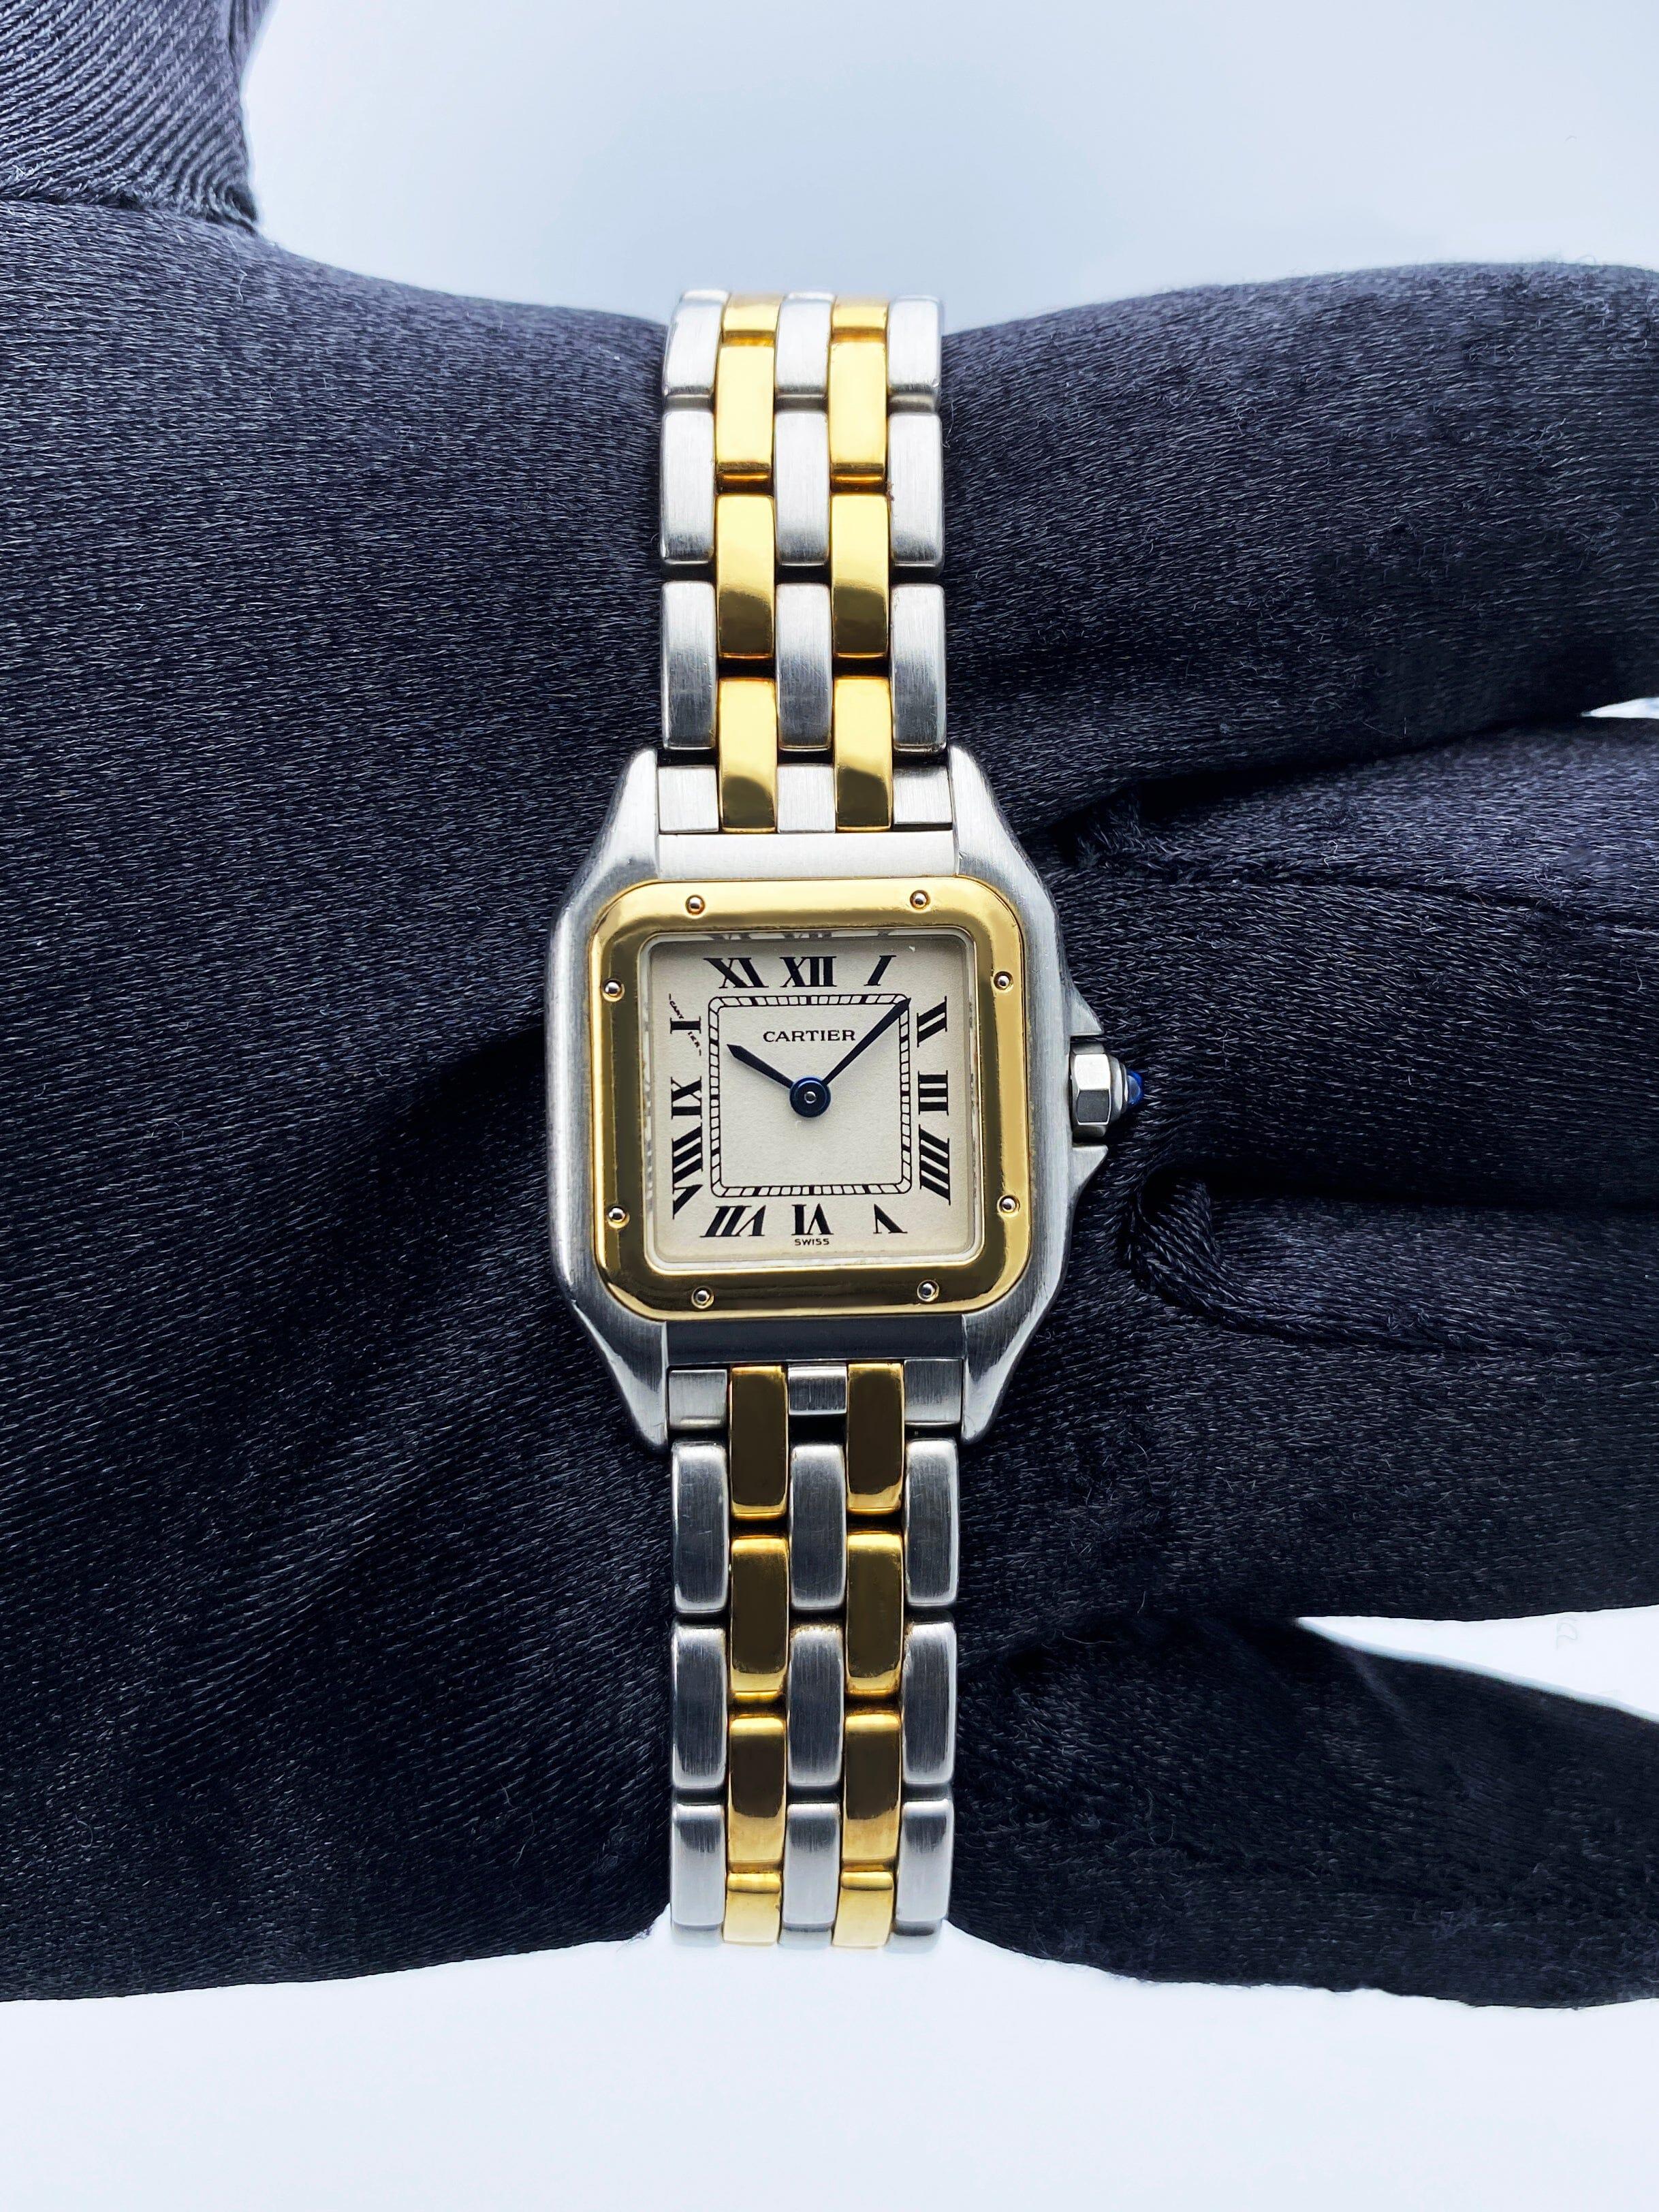 Cartier Panthere W25029B6 / 1120 Ladies Watch. 22mm stainless steel case. 18K yellow gold bezel. Off-White dial with blue steel hands and Roman numeral hour markers. Minute markers on the inner dial. Stainless steel & two rows of 18K yellow gold